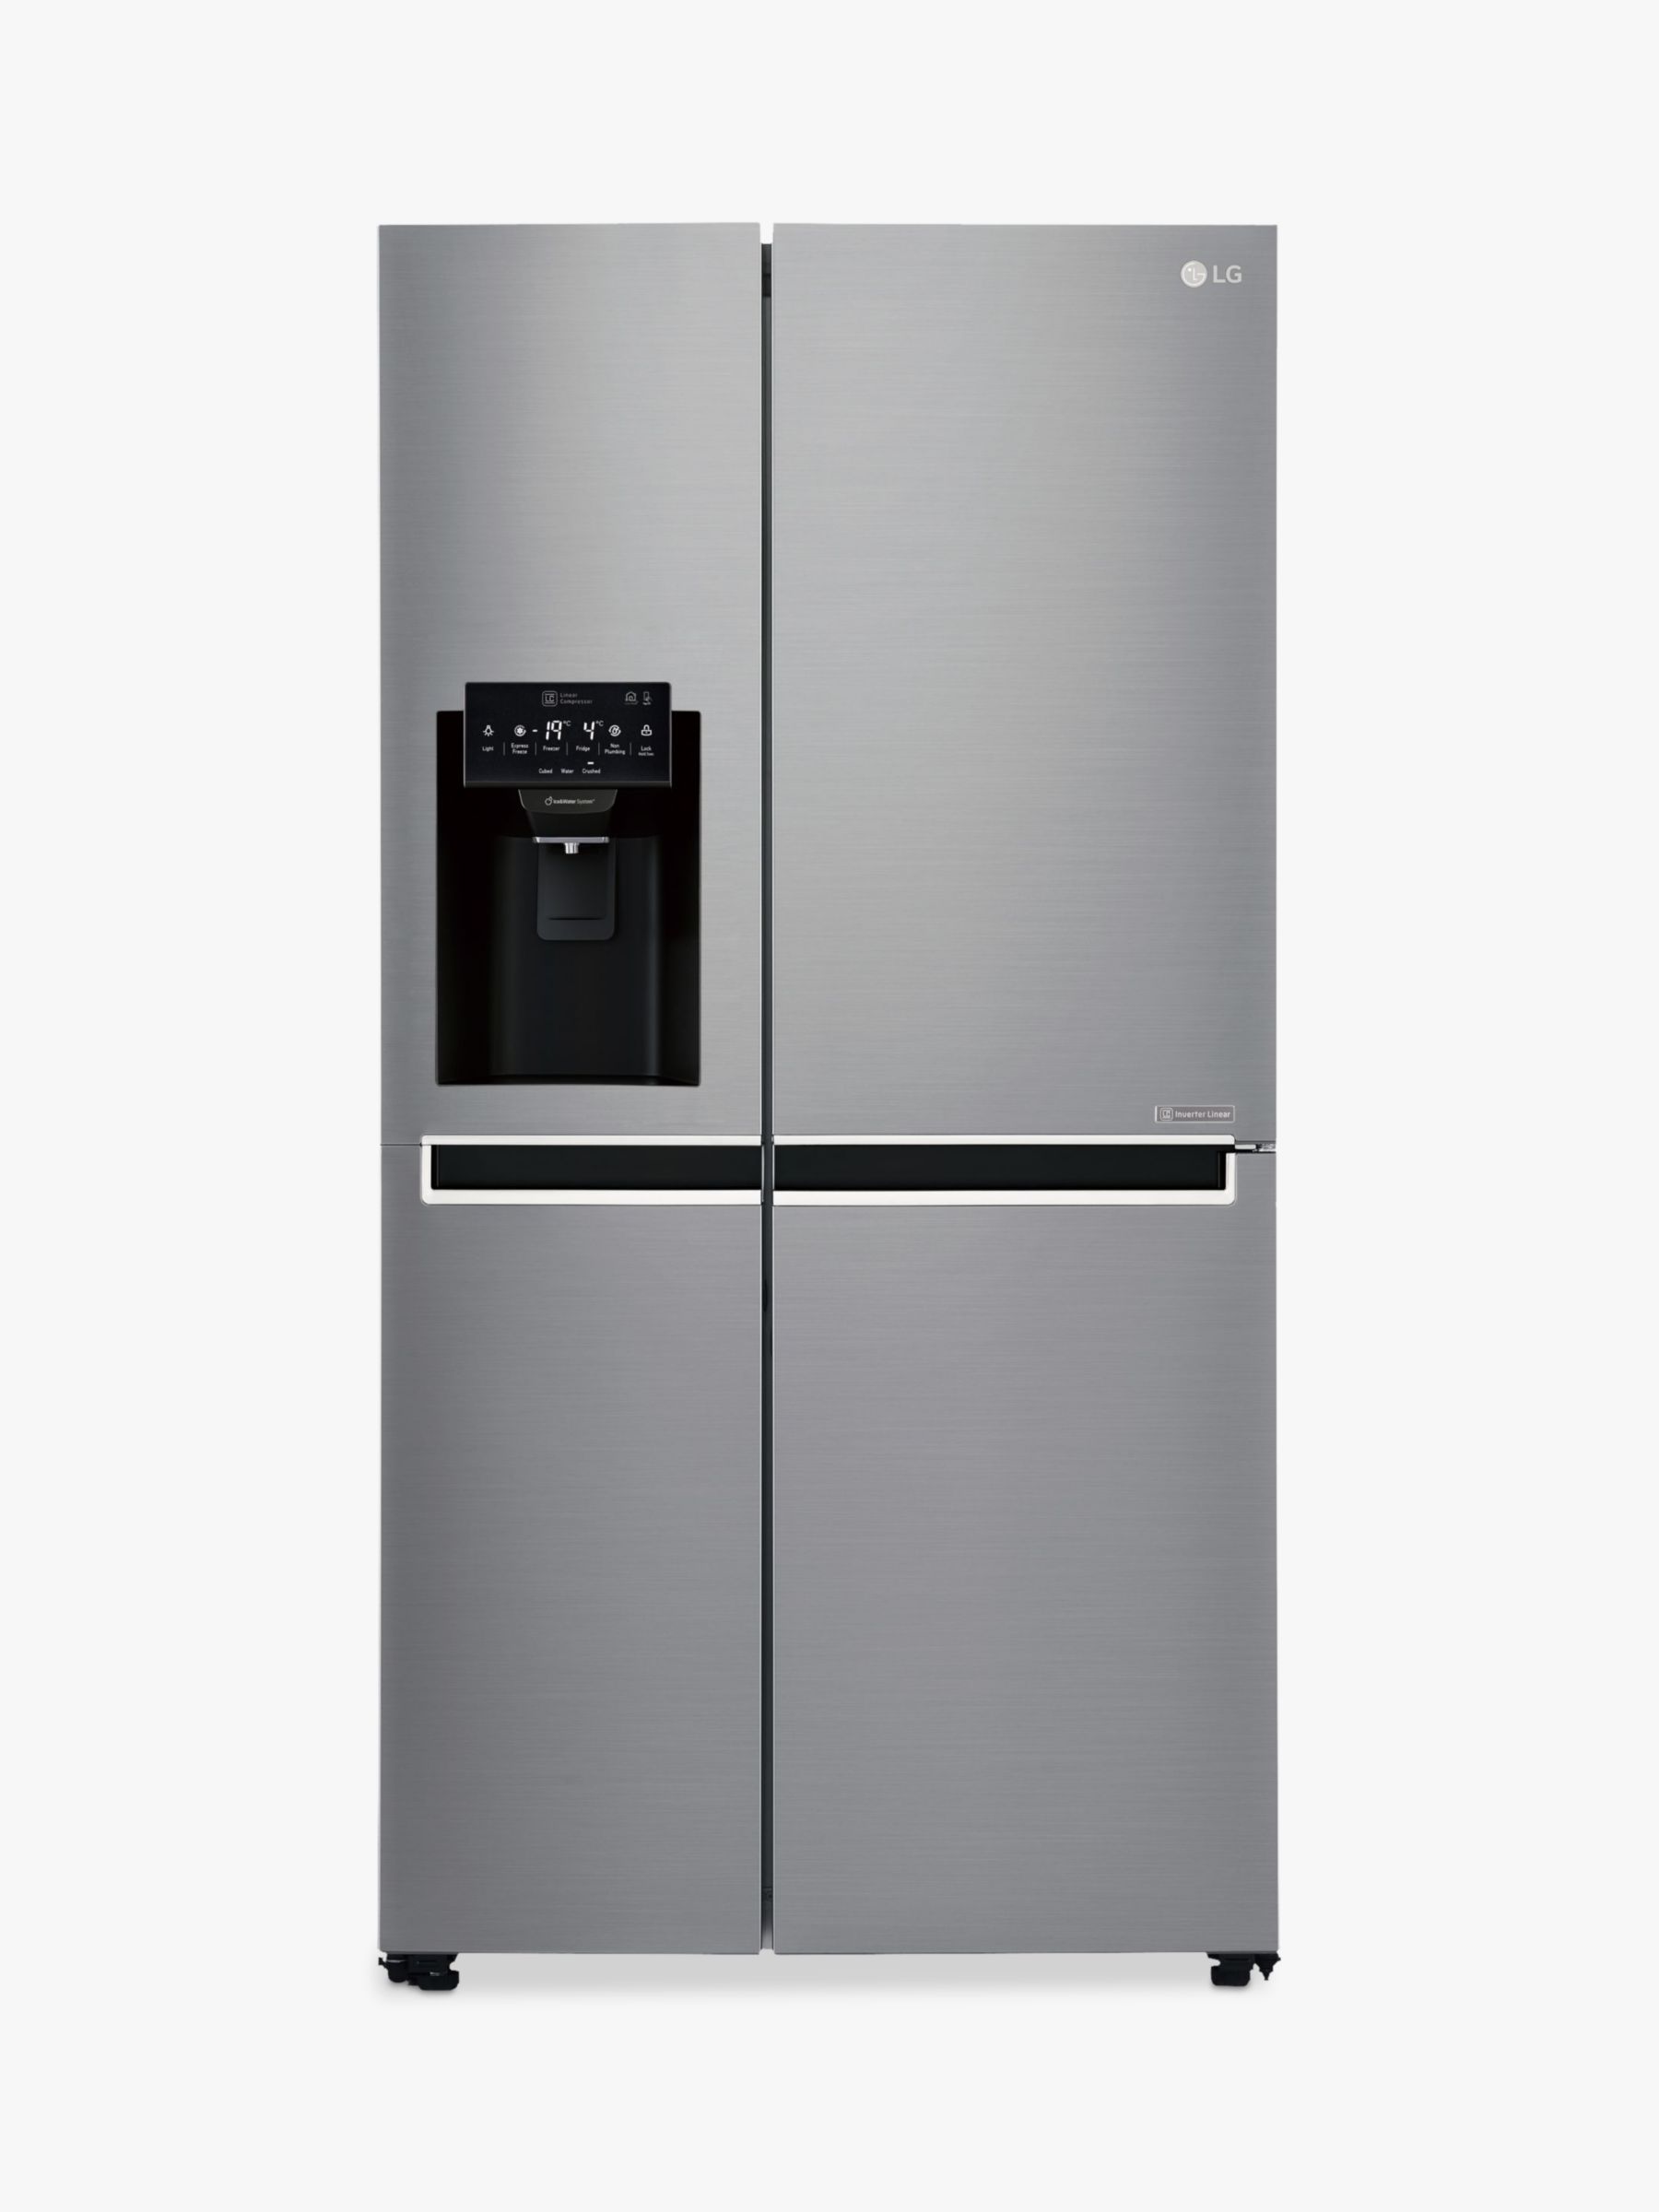 LG GSL761PZXV American Style Fridge Freezer, A+ Energy Rating, 90cm Wide, Non-Plumbed Water and Ice Dispenser, Shiny Steel